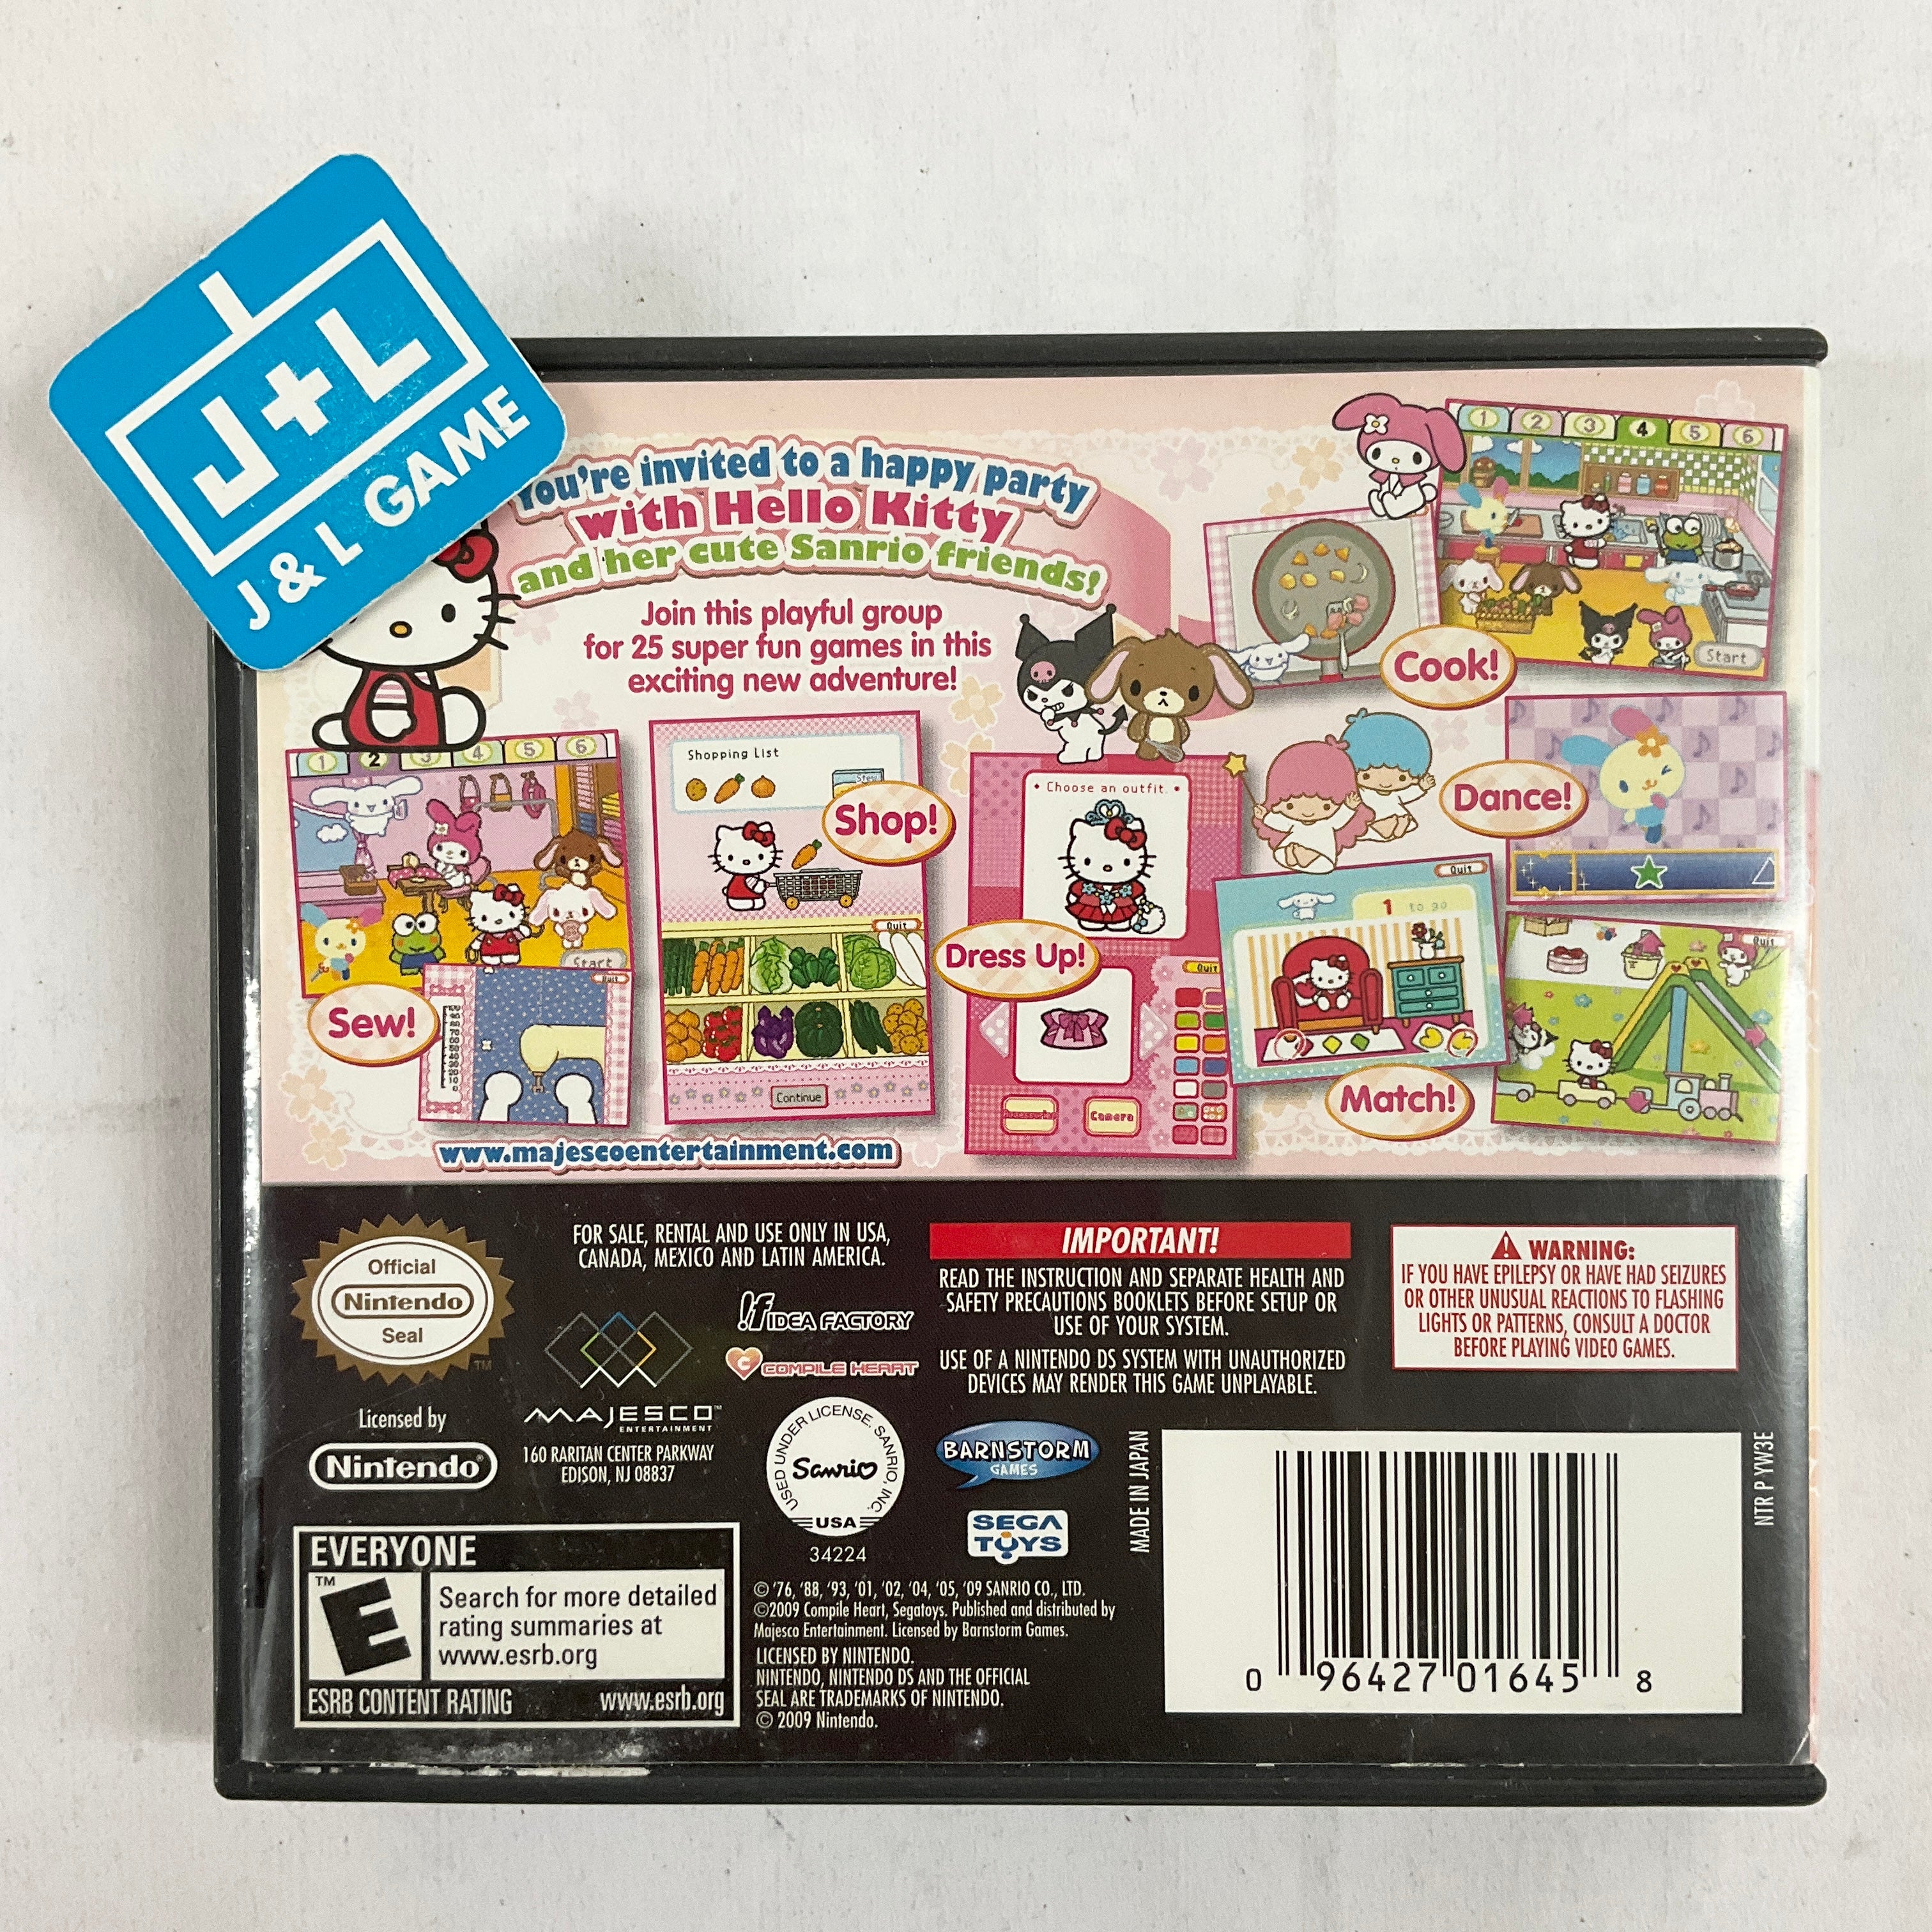 Hello Kitty Party - (NDS) Nintendo DS [Pre-Owned] Video Games Majesco   